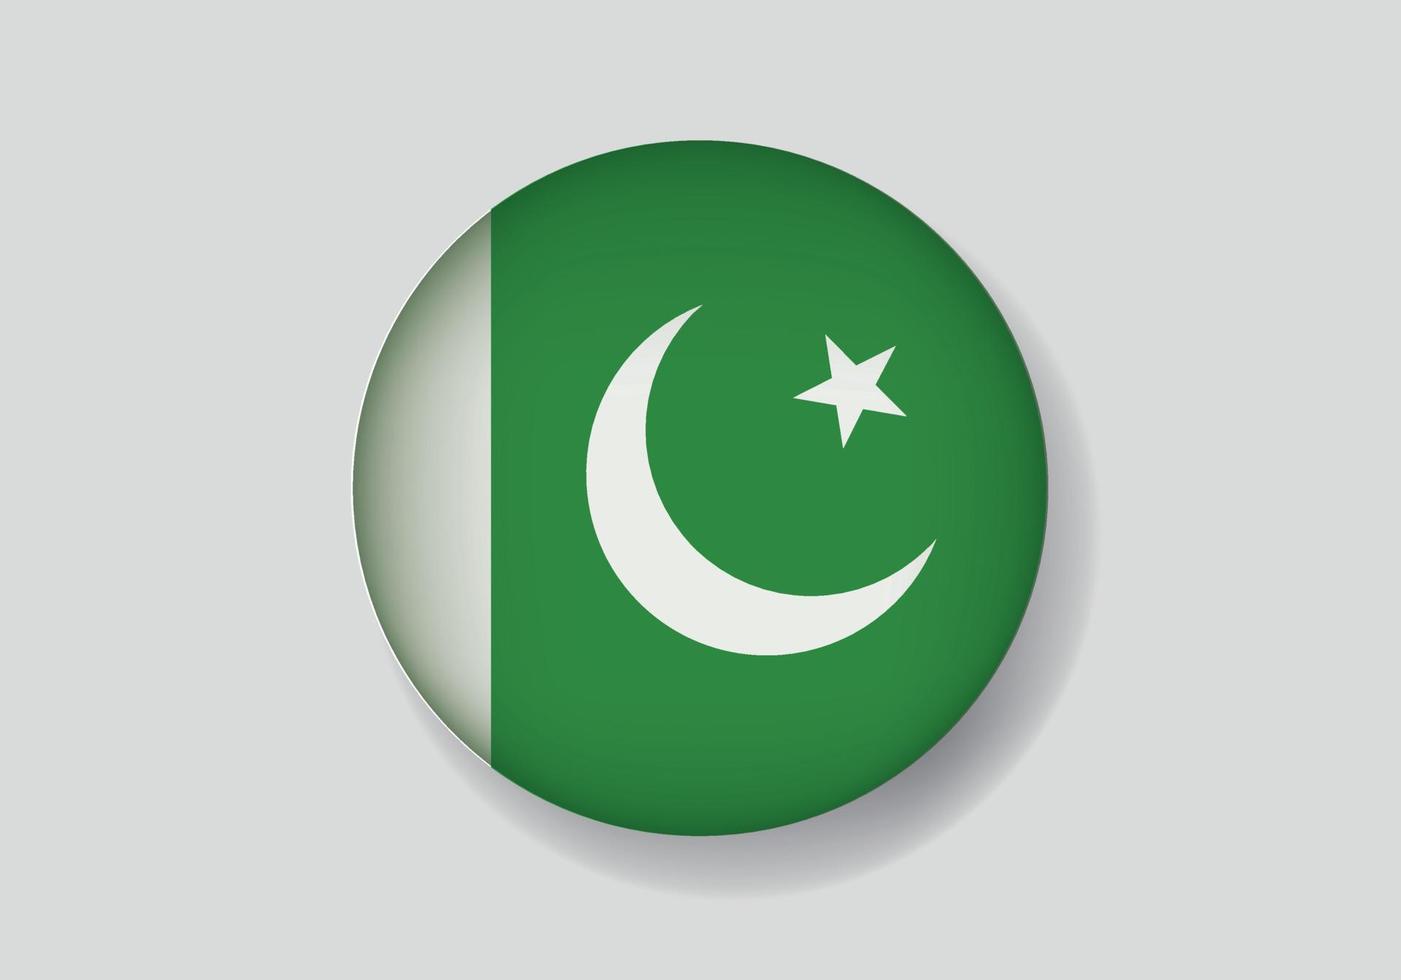 Flag of Pakistan as round glossy icon. Button with Pakistan flag vector